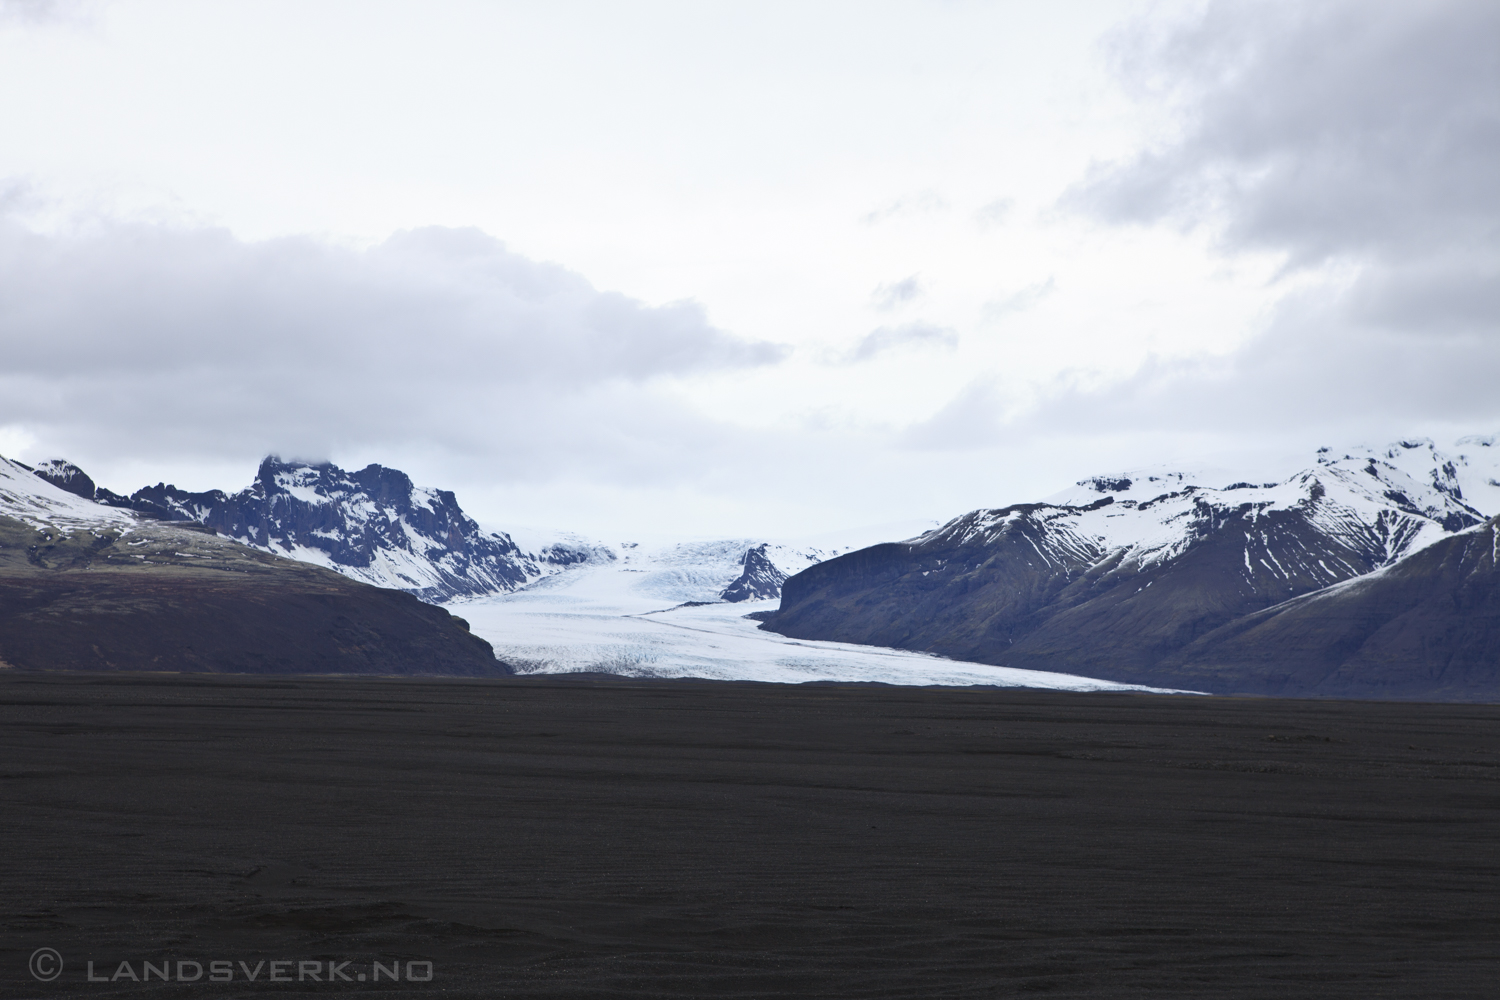 Skeiðarárjökull. A large outlet glacier draining south from Iceland’s largest ice cap Vatnajökull. 

(Canon EOS 5D Mark II / Canon EF 24-70mm f/2.8 L USM)